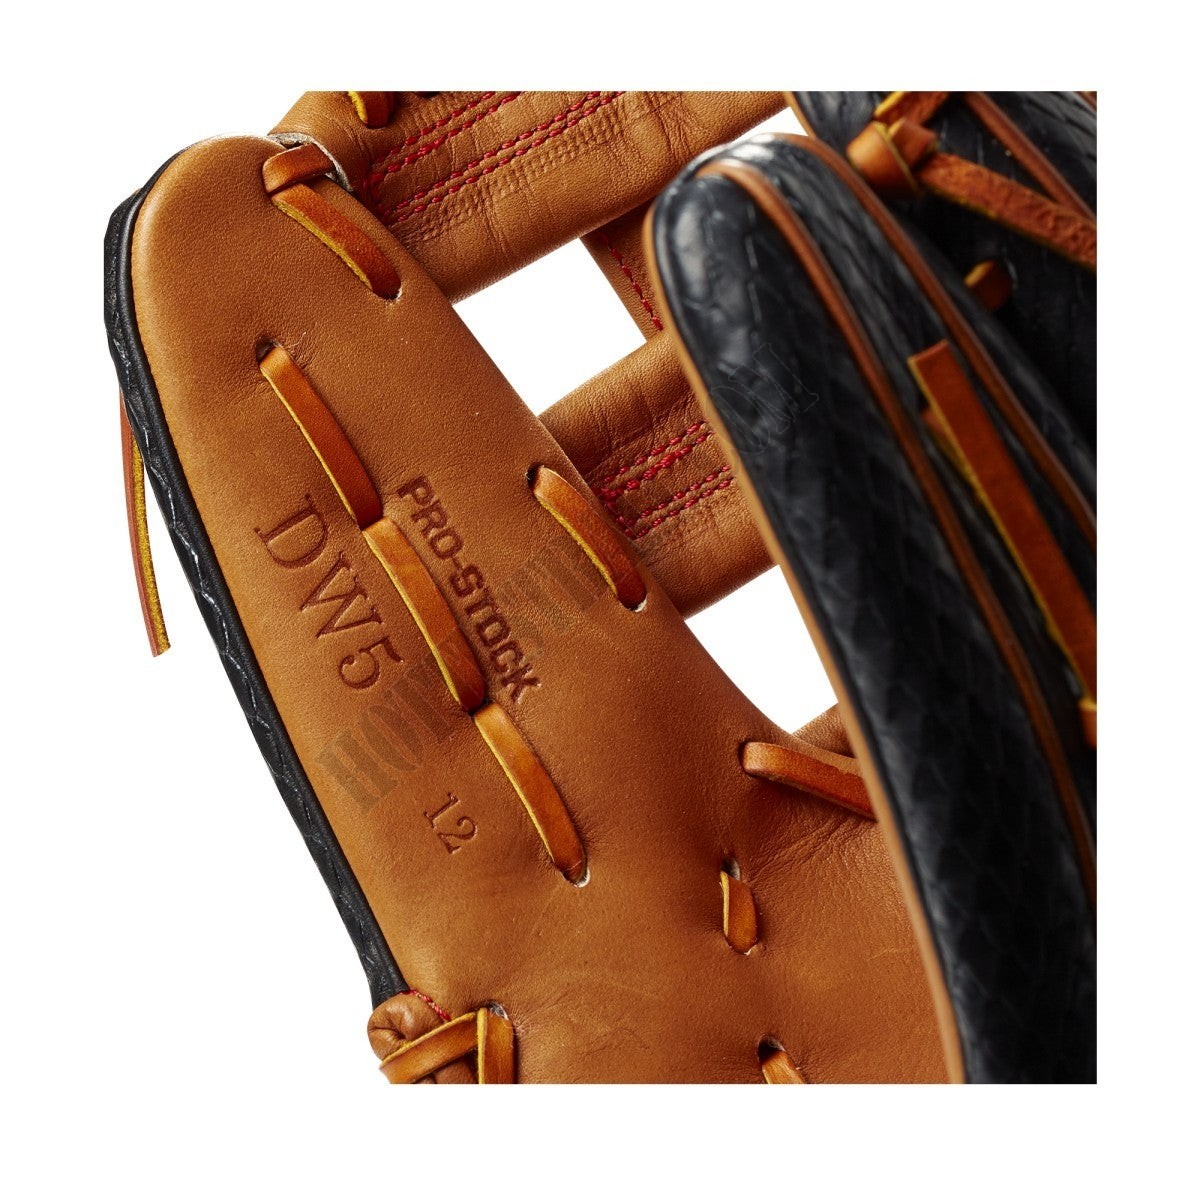 2021 A2000 DW5 12" Infield Baseball Glove -  Limited Edition ● Wilson Promotions - -7